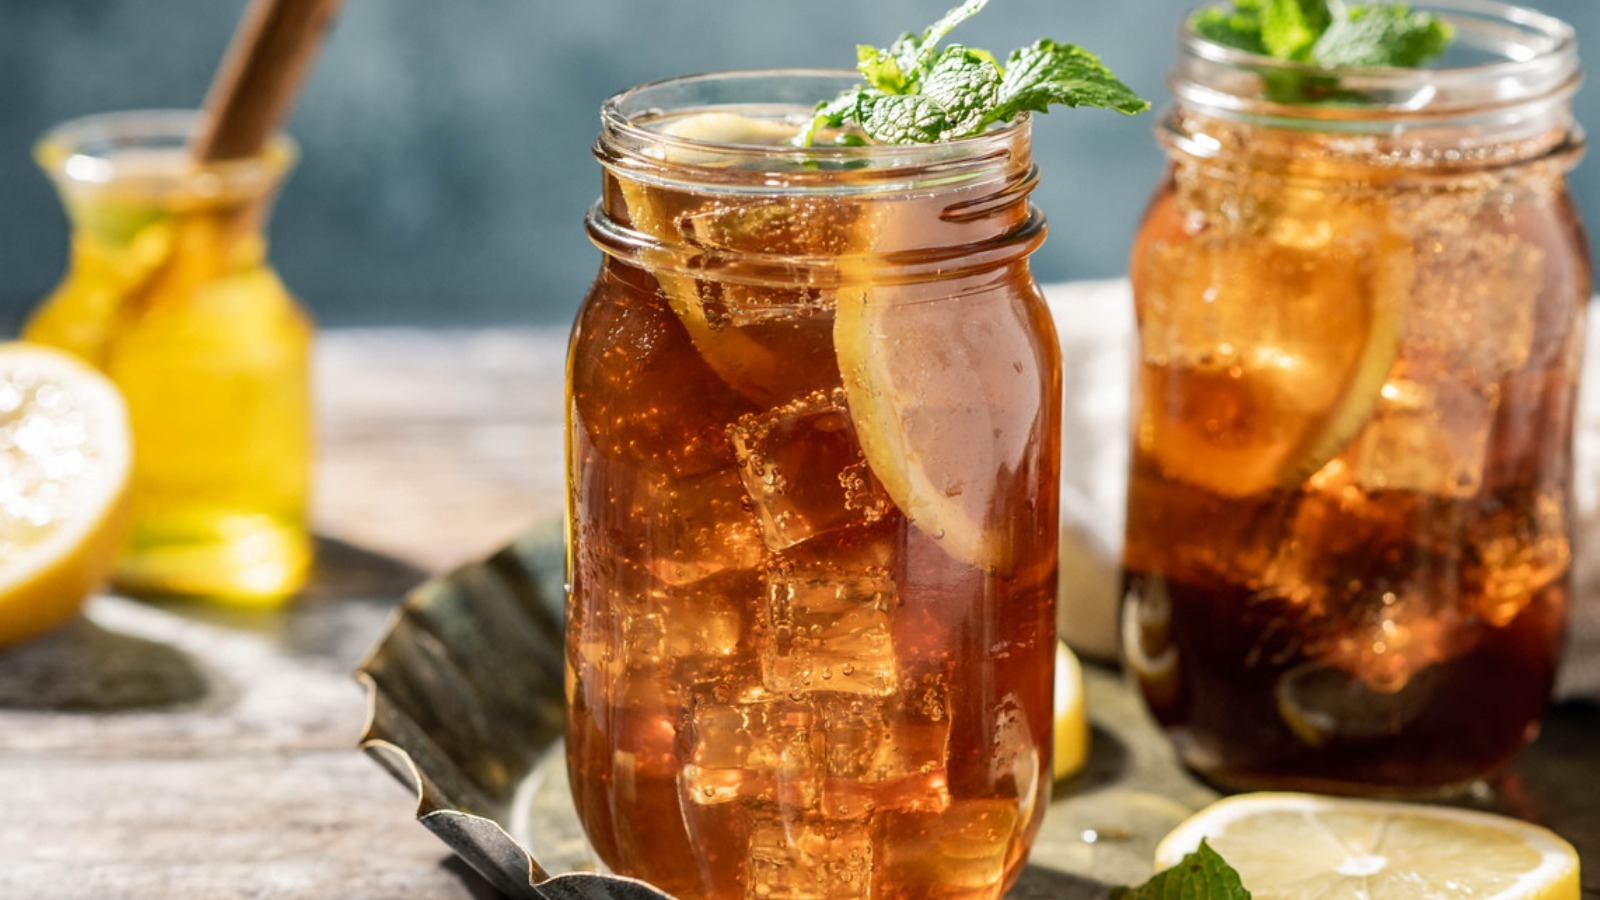 https://www.tastingtable.com/img/gallery/simple-and-strong-long-island-iced-tea-recipe/l-intro-1658619881.jpg